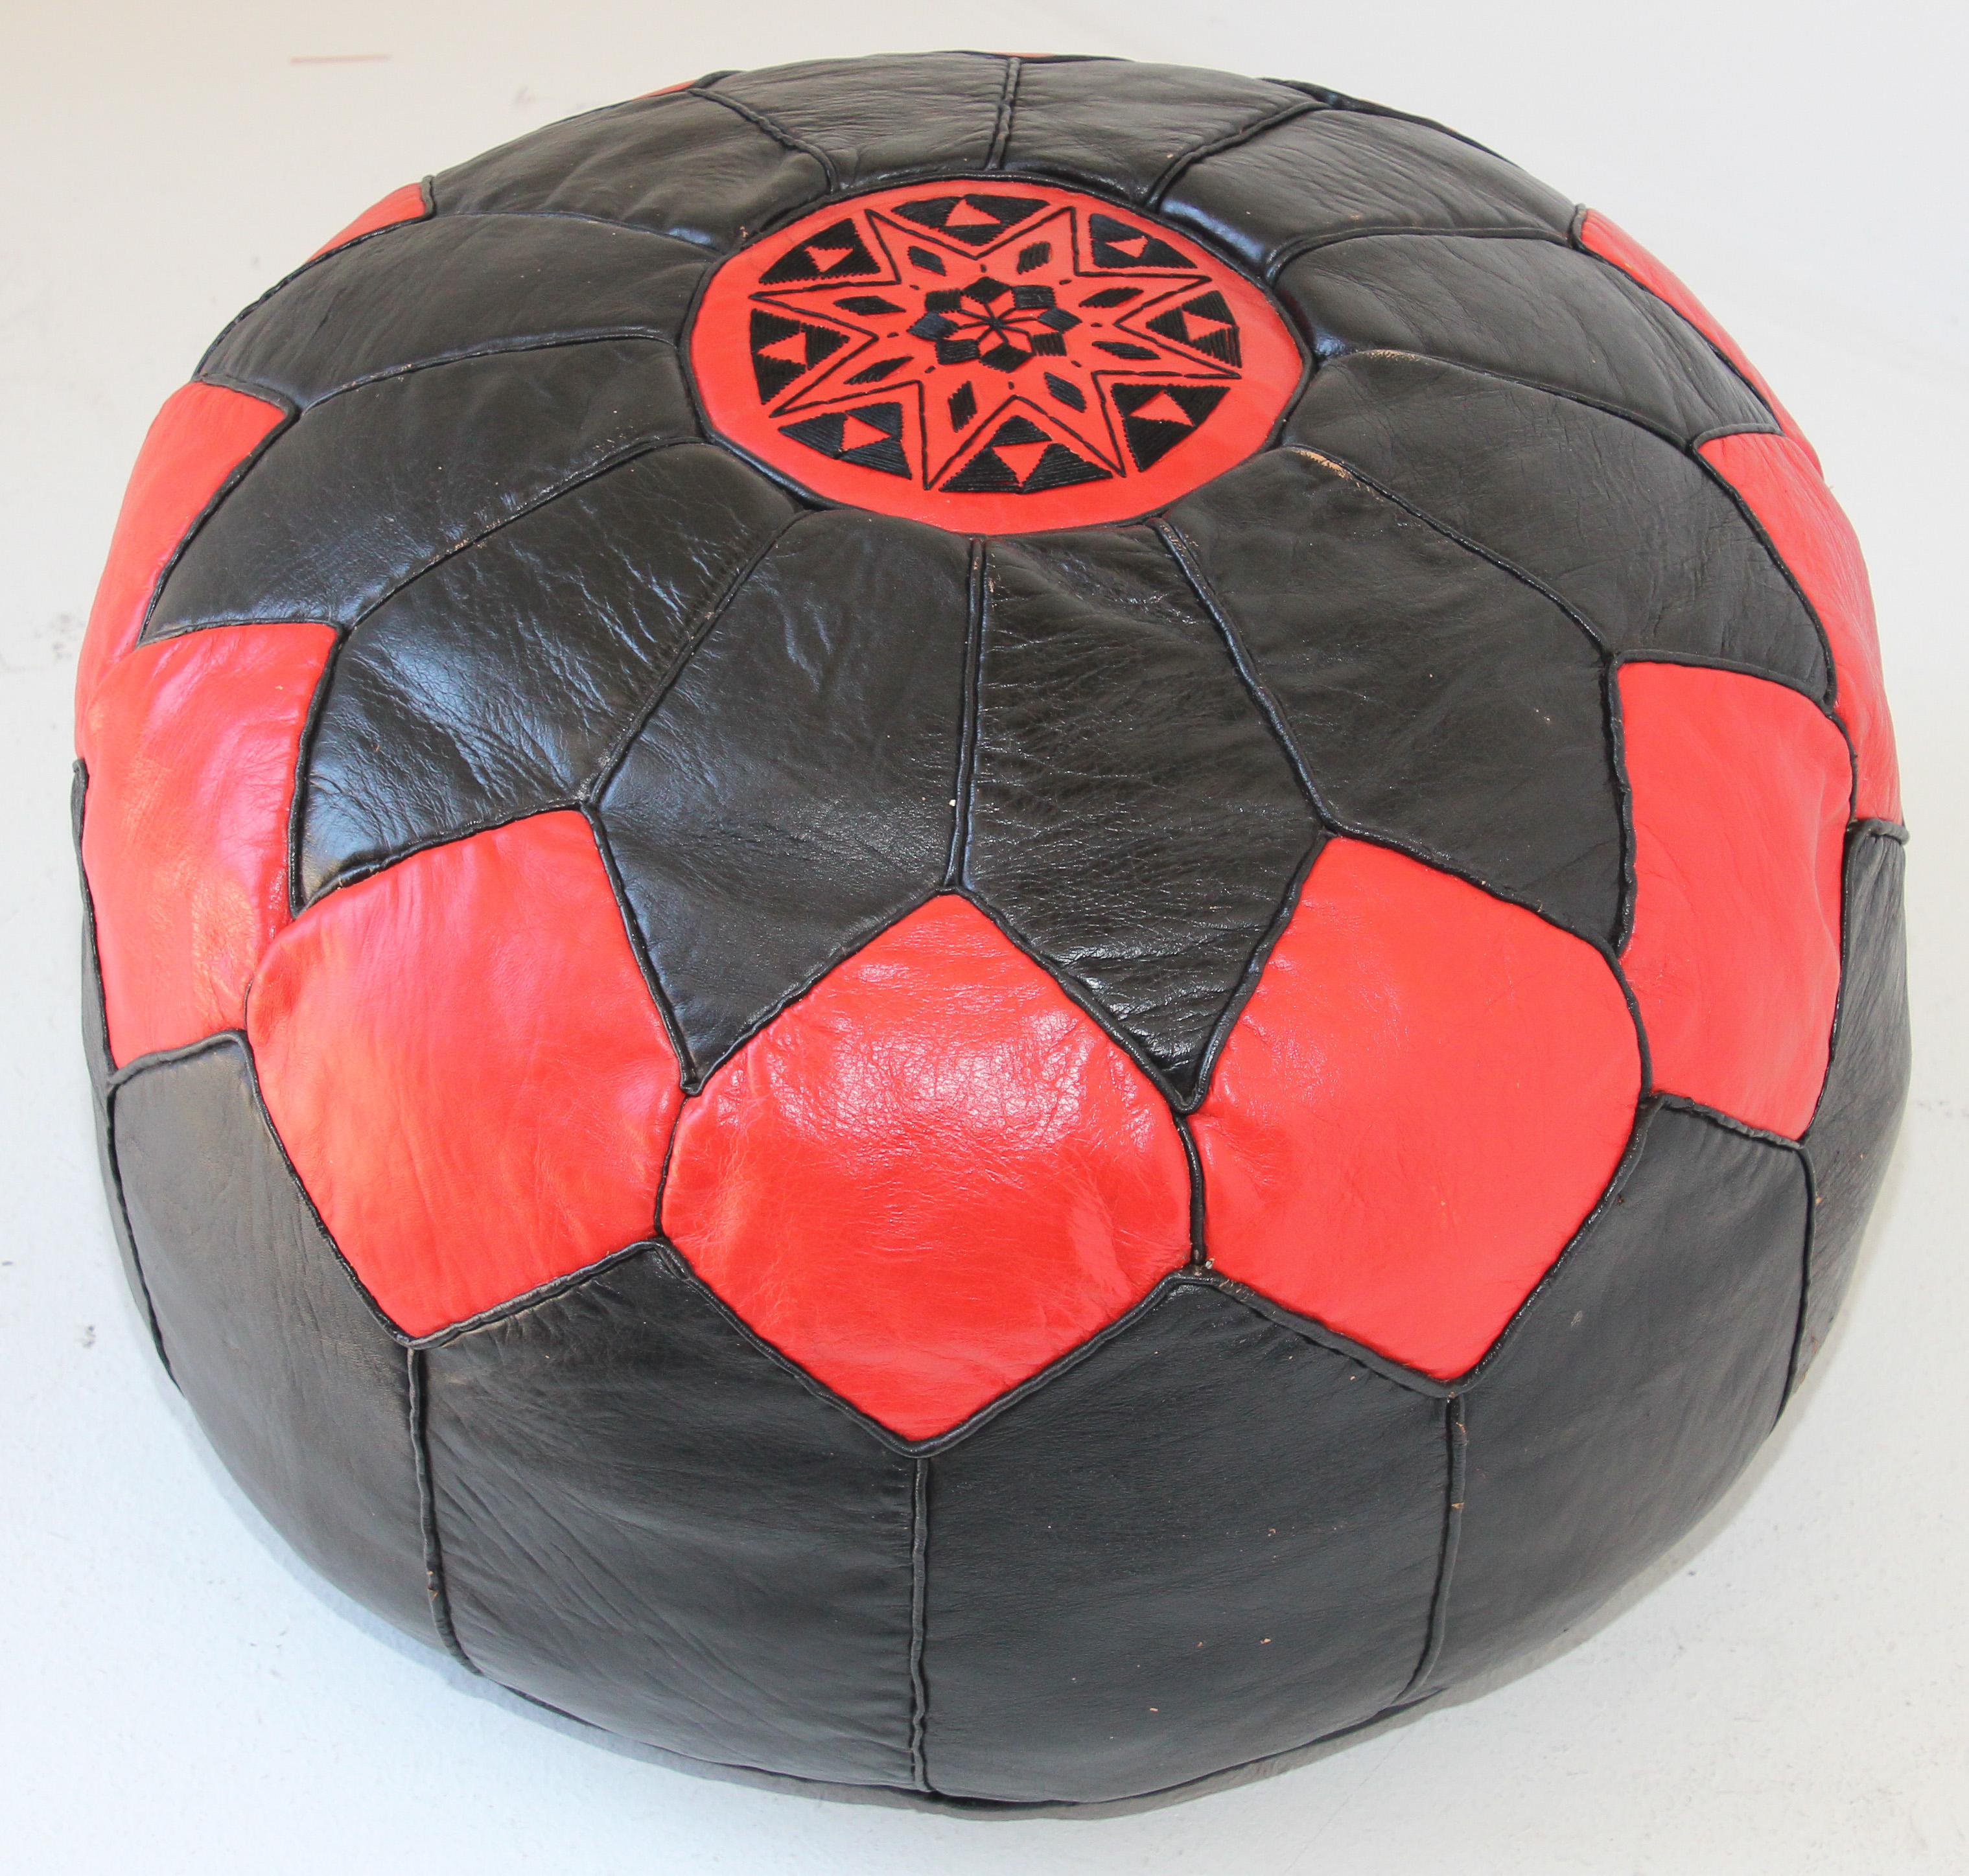 Vintage Moroccan Leather Pouf Hand-Tooled in Marrakesh Red and Black In Good Condition For Sale In North Hollywood, CA